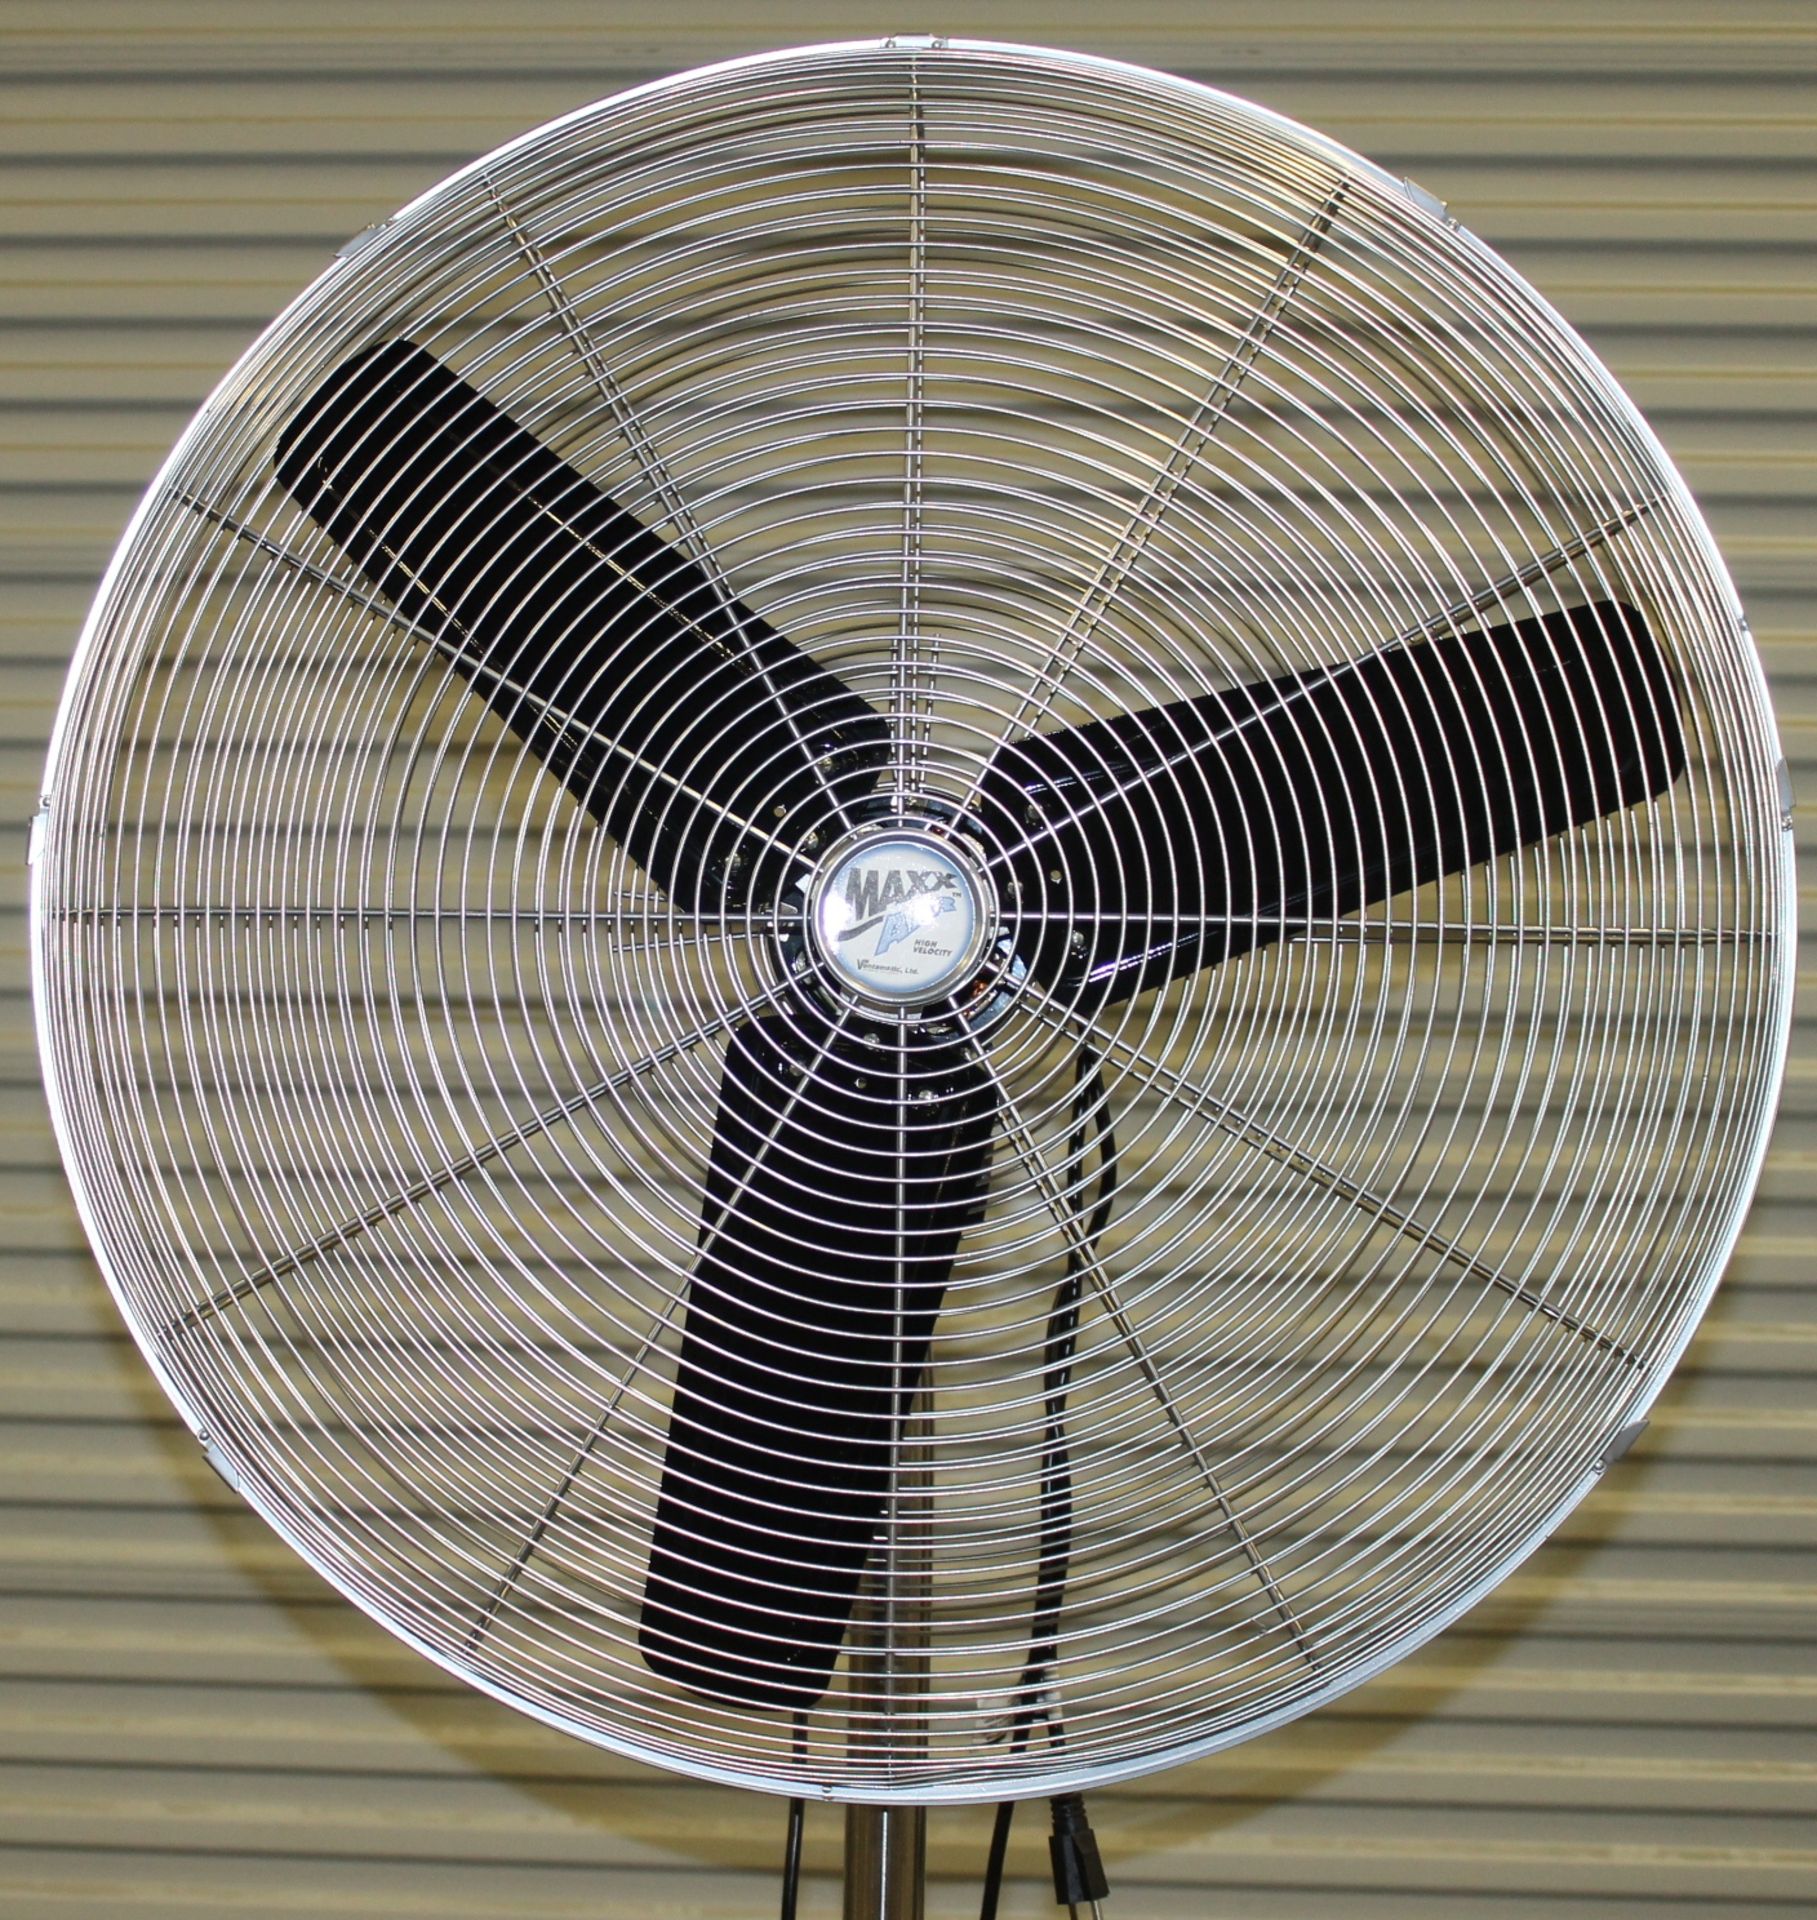 HIGH VELOCITY 30" PEDESTAL FAN,  HEAVY DUTY 3-SPEED THERMALLY PROTECTED MOTOR, POWERFUL AIRFLOW: